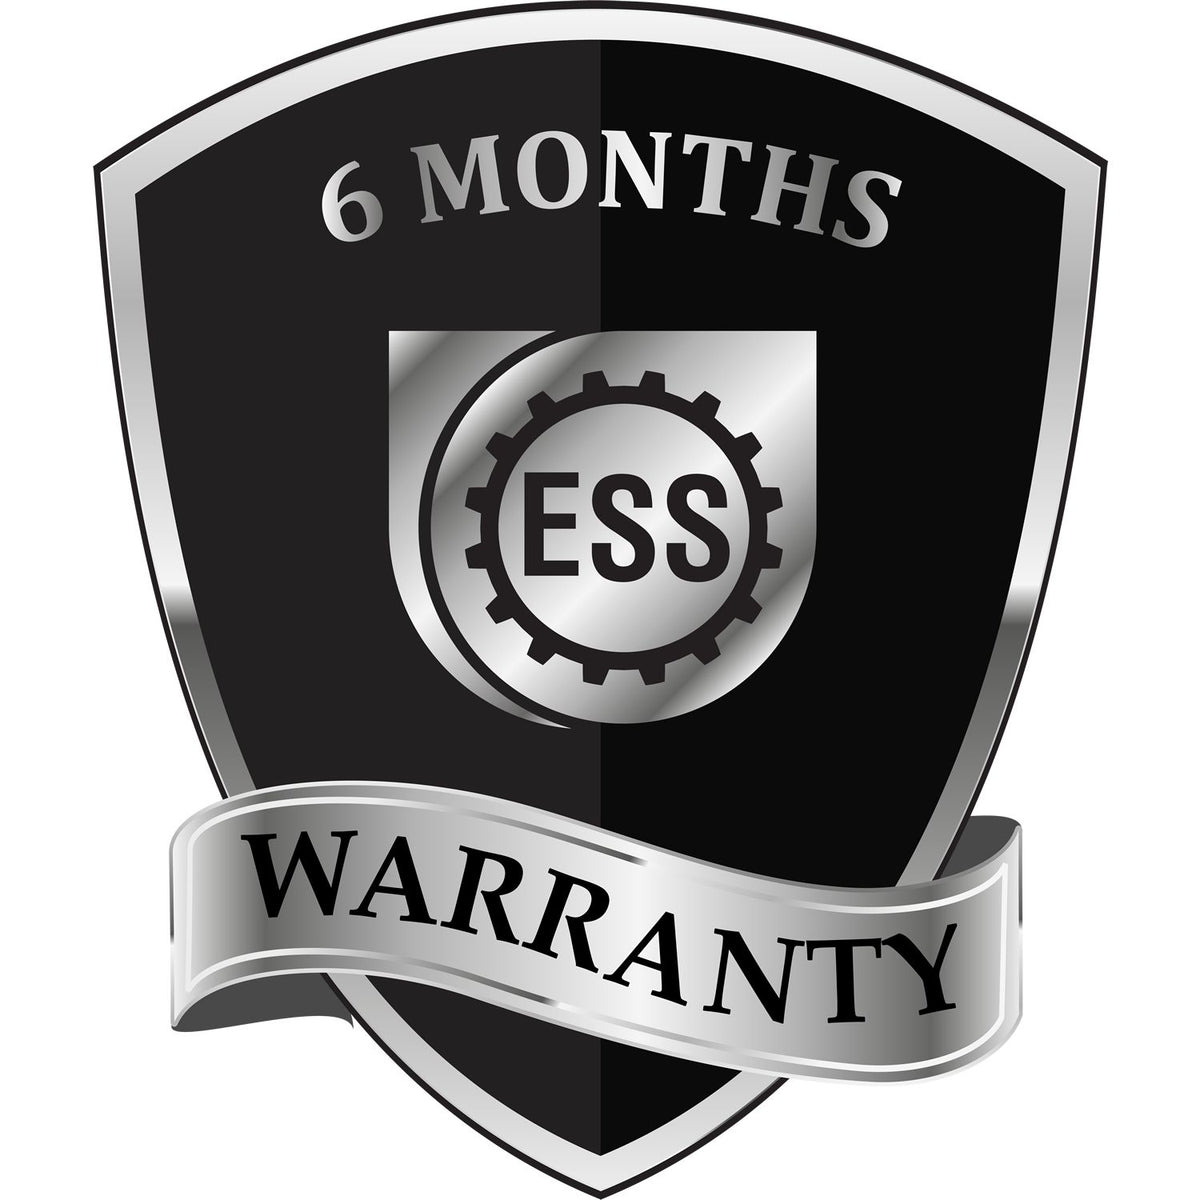 A badge or emblem showing a warranty icon for the Slim Pre-Inked Arizona Professional Engineer Seal Stamp